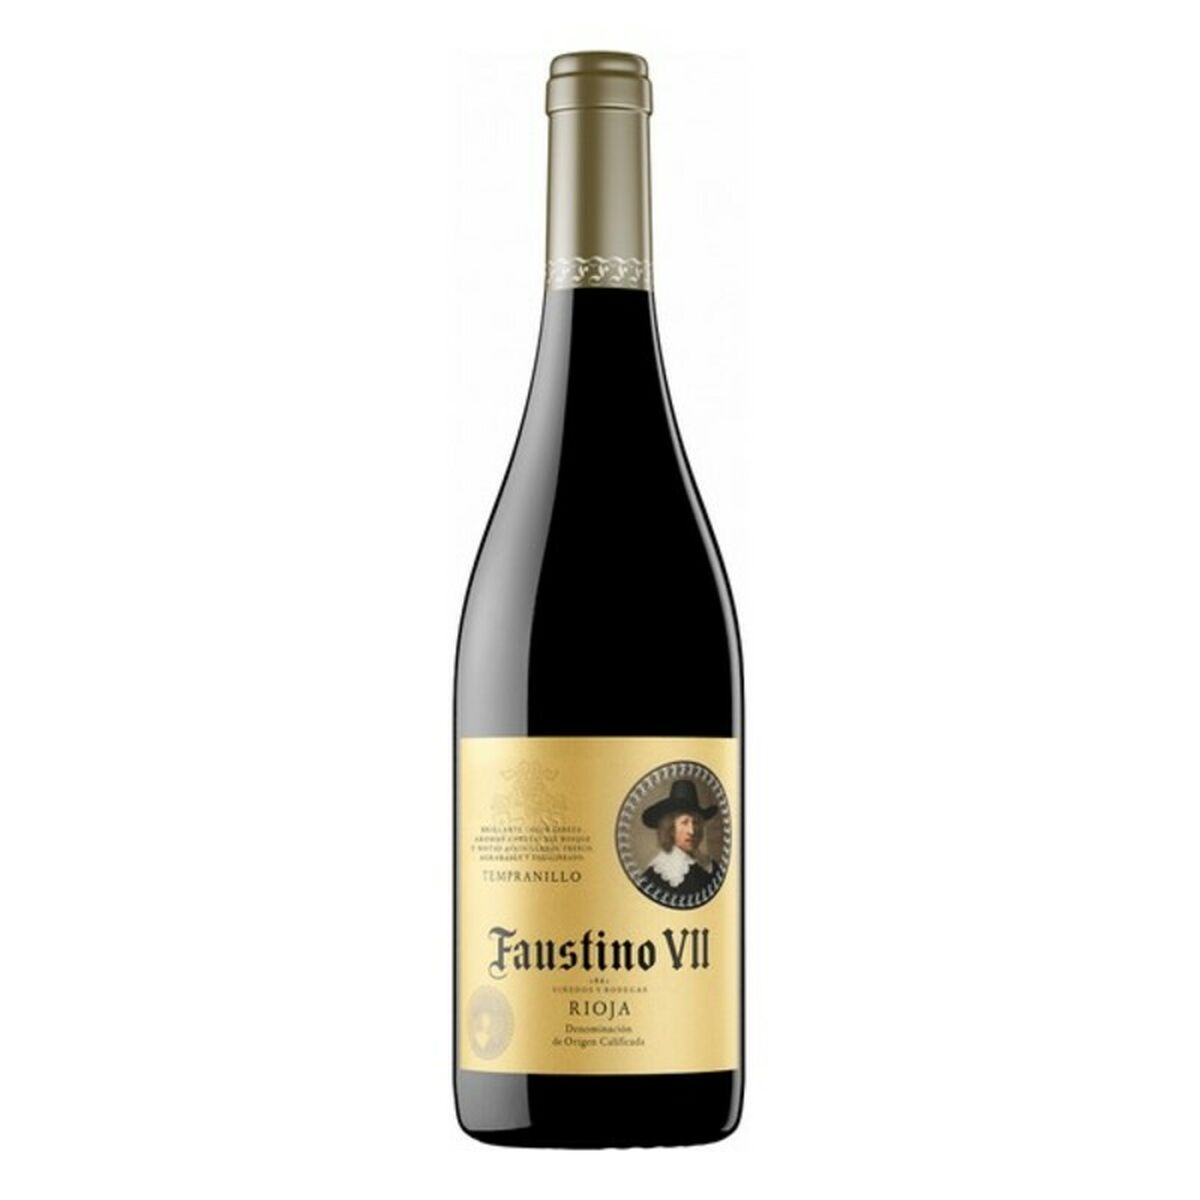 Rode wijn Faustino VII 390004 (75 cl)